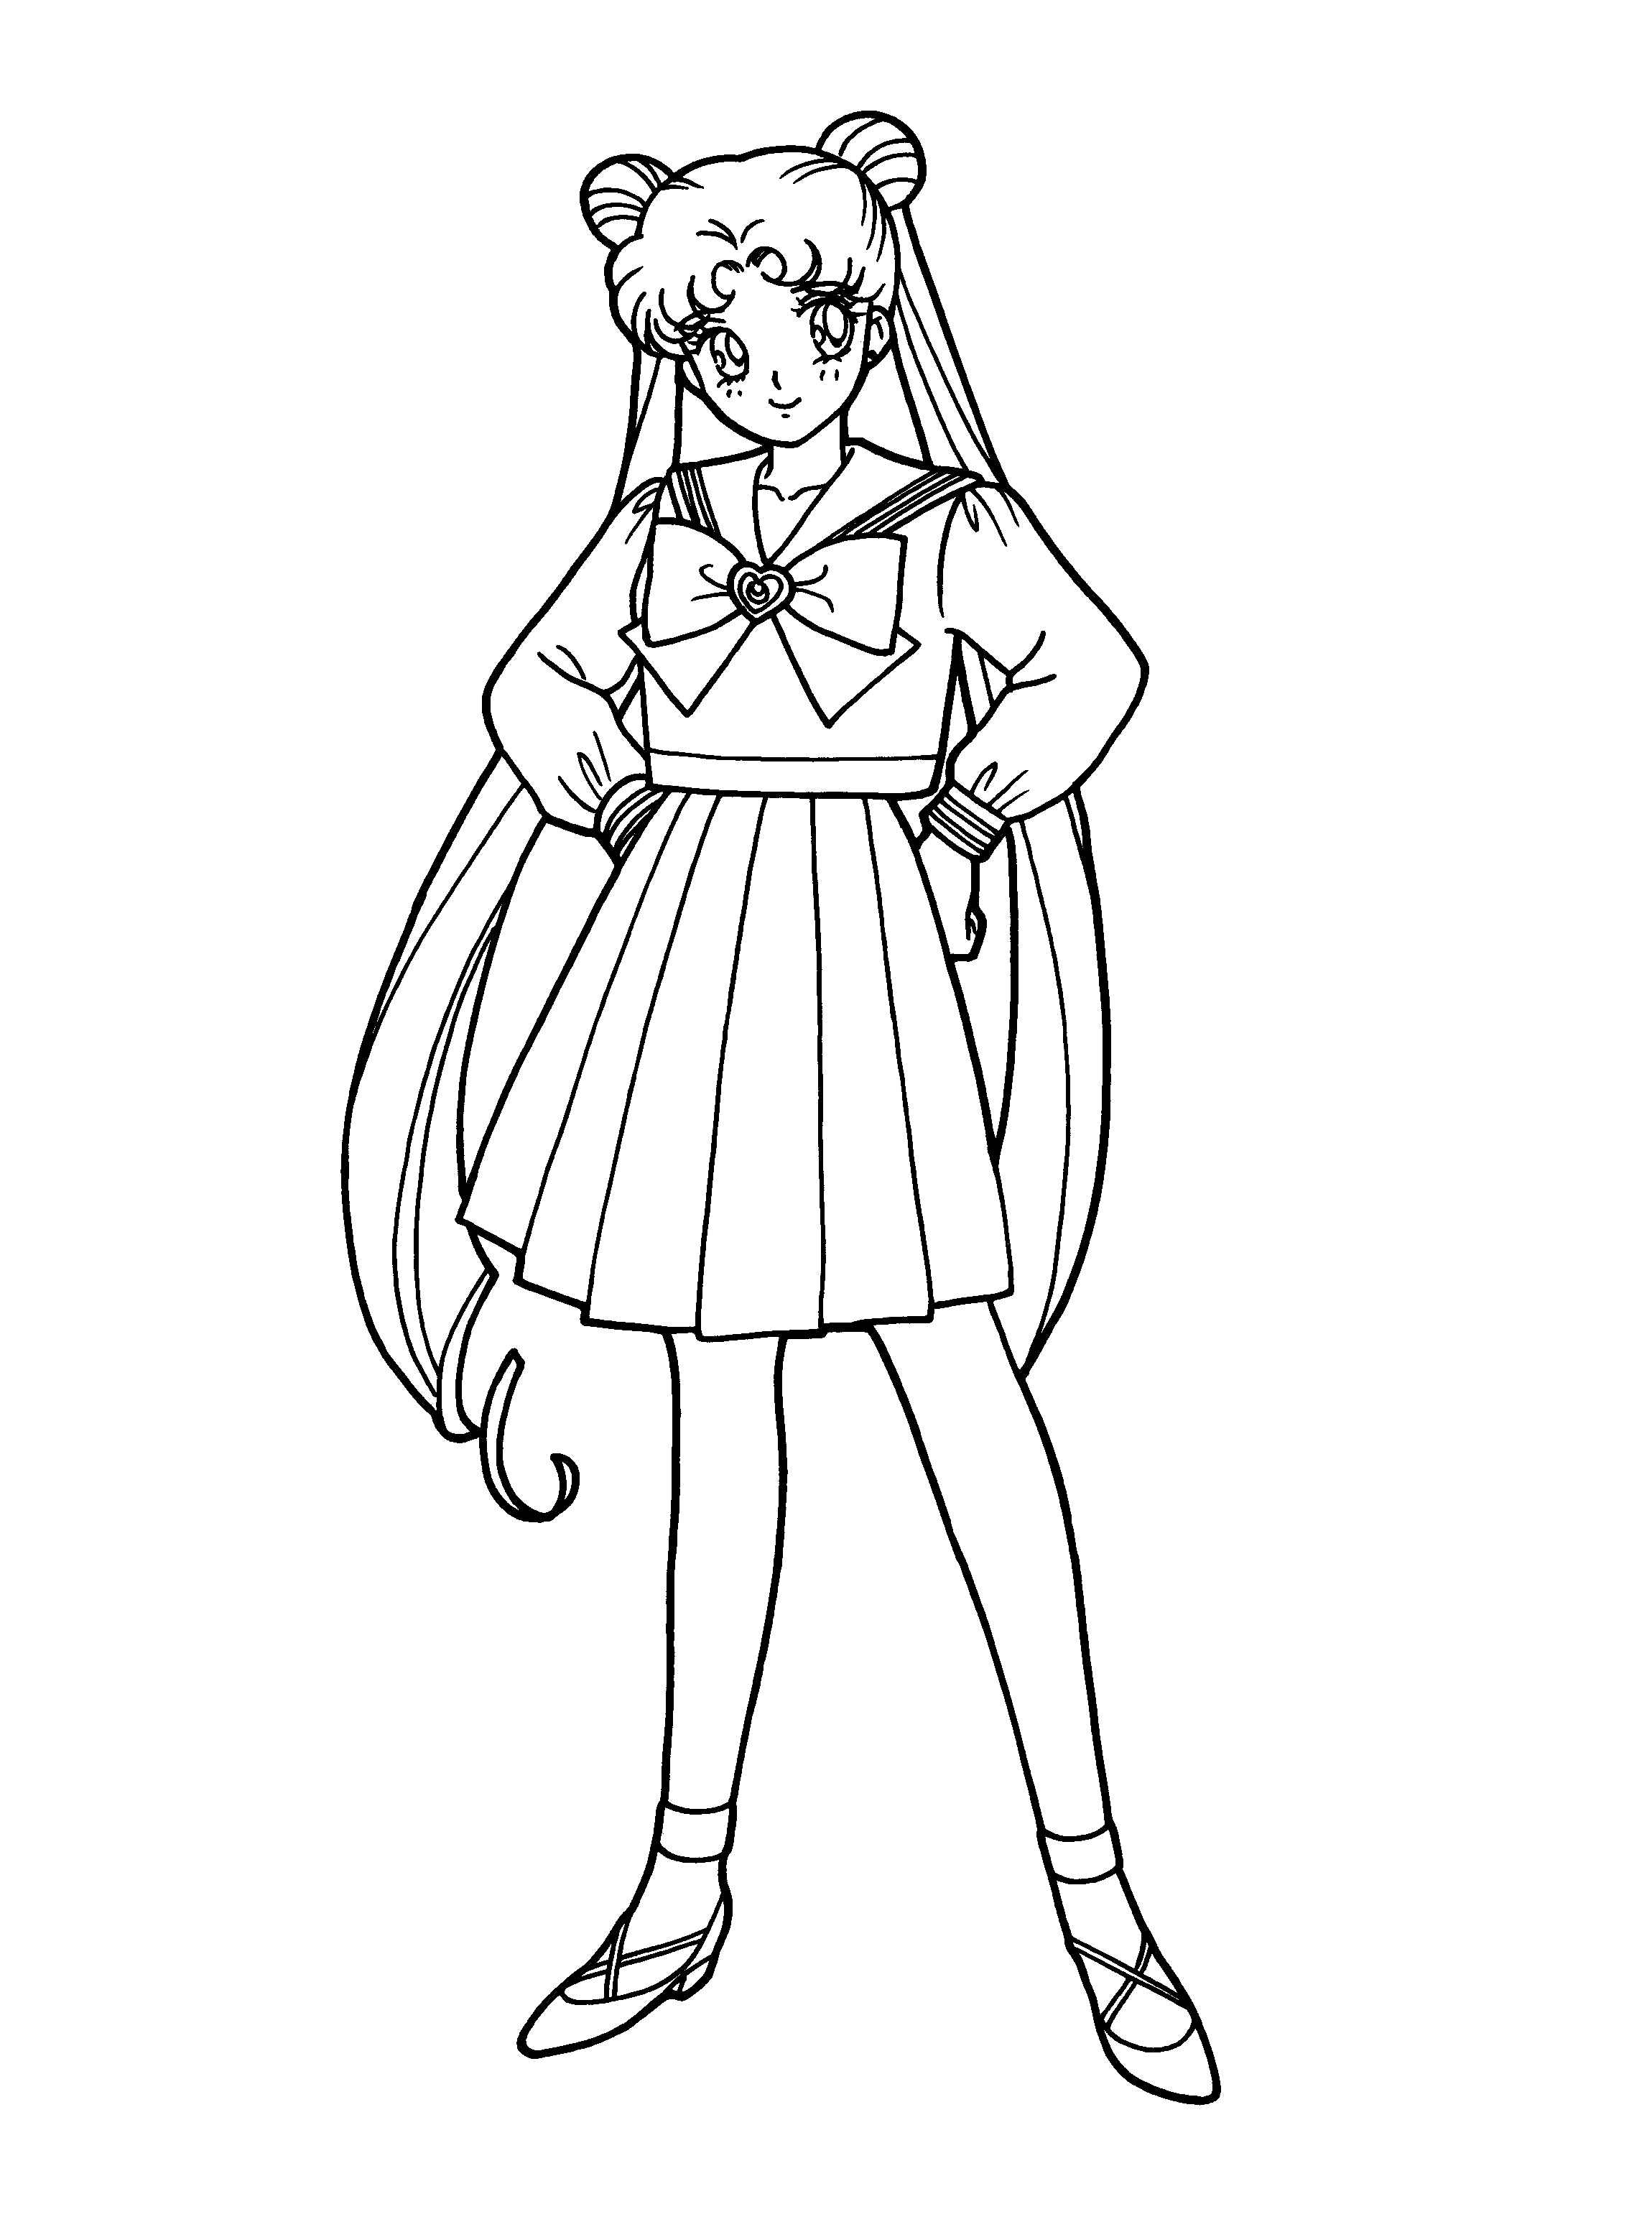 Sailor Moon Coloring Pages Front Kiddypicts You can easily print or download them at your convenience. sailor moon coloring pages front